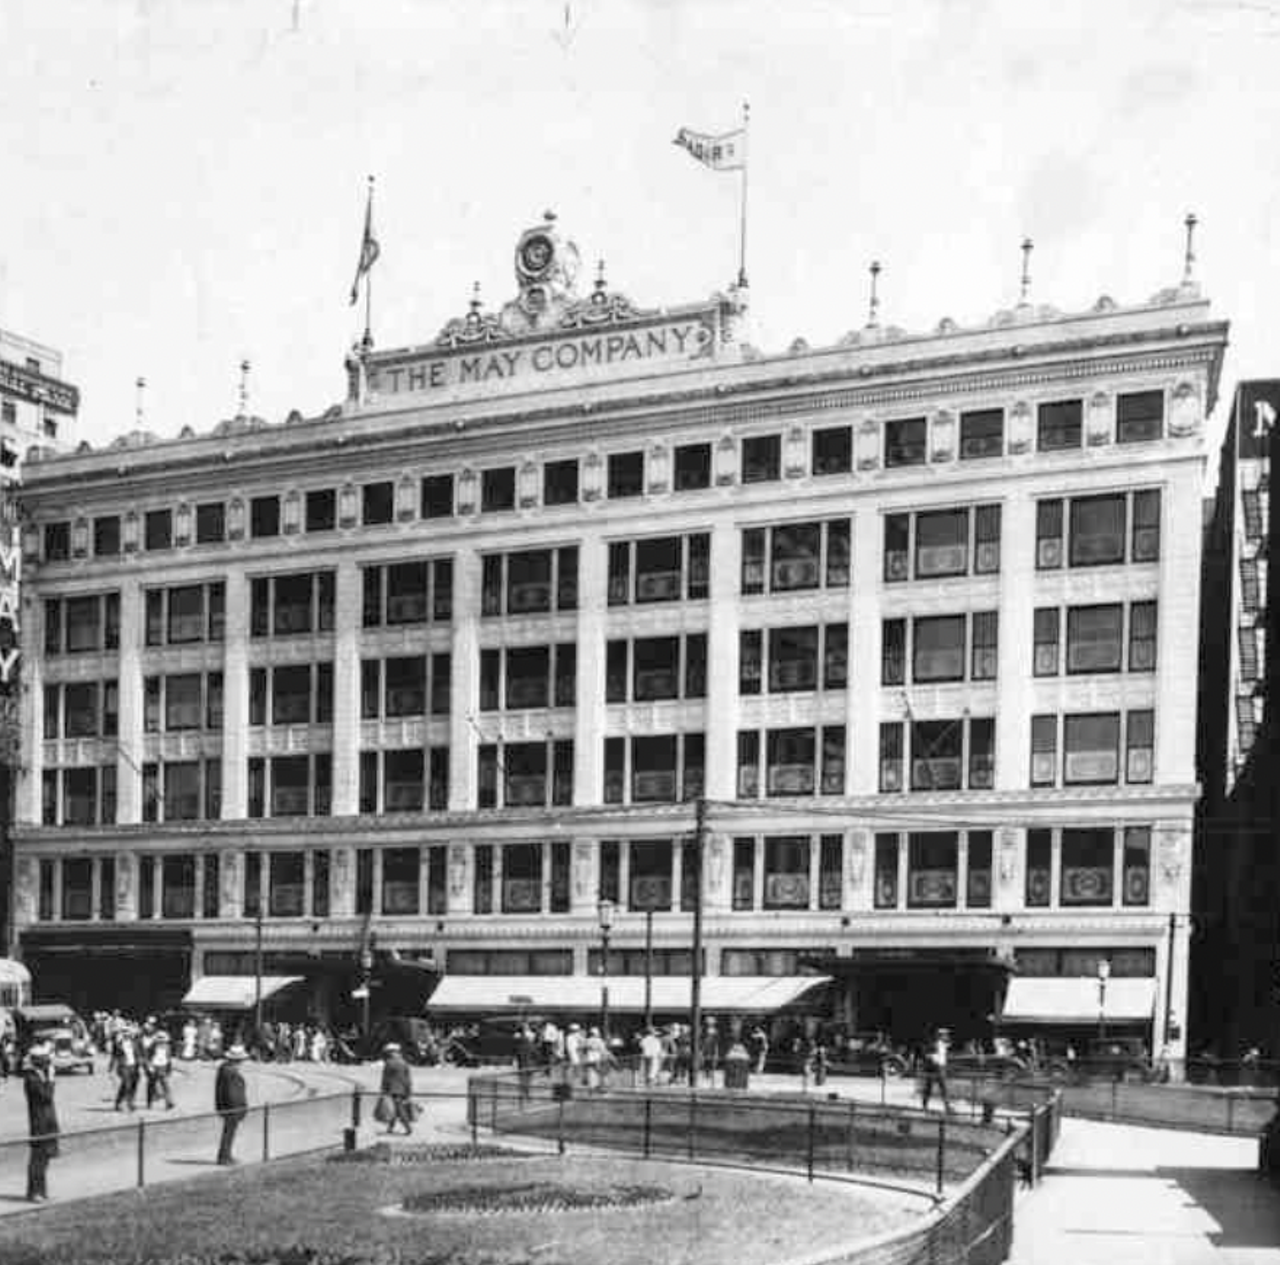  May Company
200 Euclid Ave., Cleveland
May Company department store opened 800,000 square feet of space in Public Square in 1915 and was the third largest store in the nation when it opened. The store contained everything from fancy clothing to homeware to furniture and more. There was also an auditorium, a barber shop, a playground, a daycare and more than 2,500 employees at its height, when there were nine other locations. Many closed in the 1980s and 90s and the downtown store closed in 1993. Kaufmann’s took over the other stores that were still open.